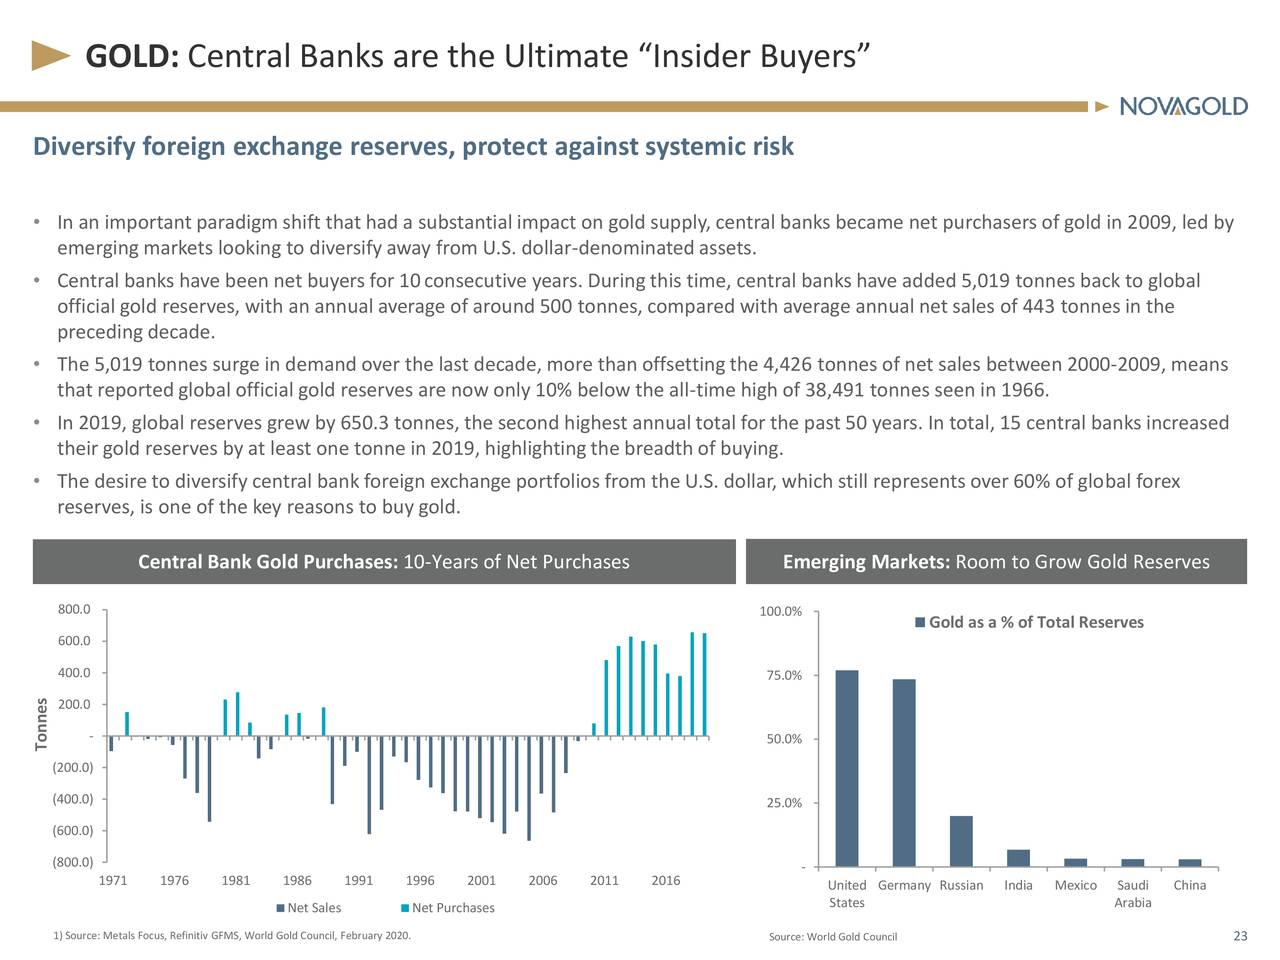 GOLD: Central Banks are the Ultimate “Insider Buyers”